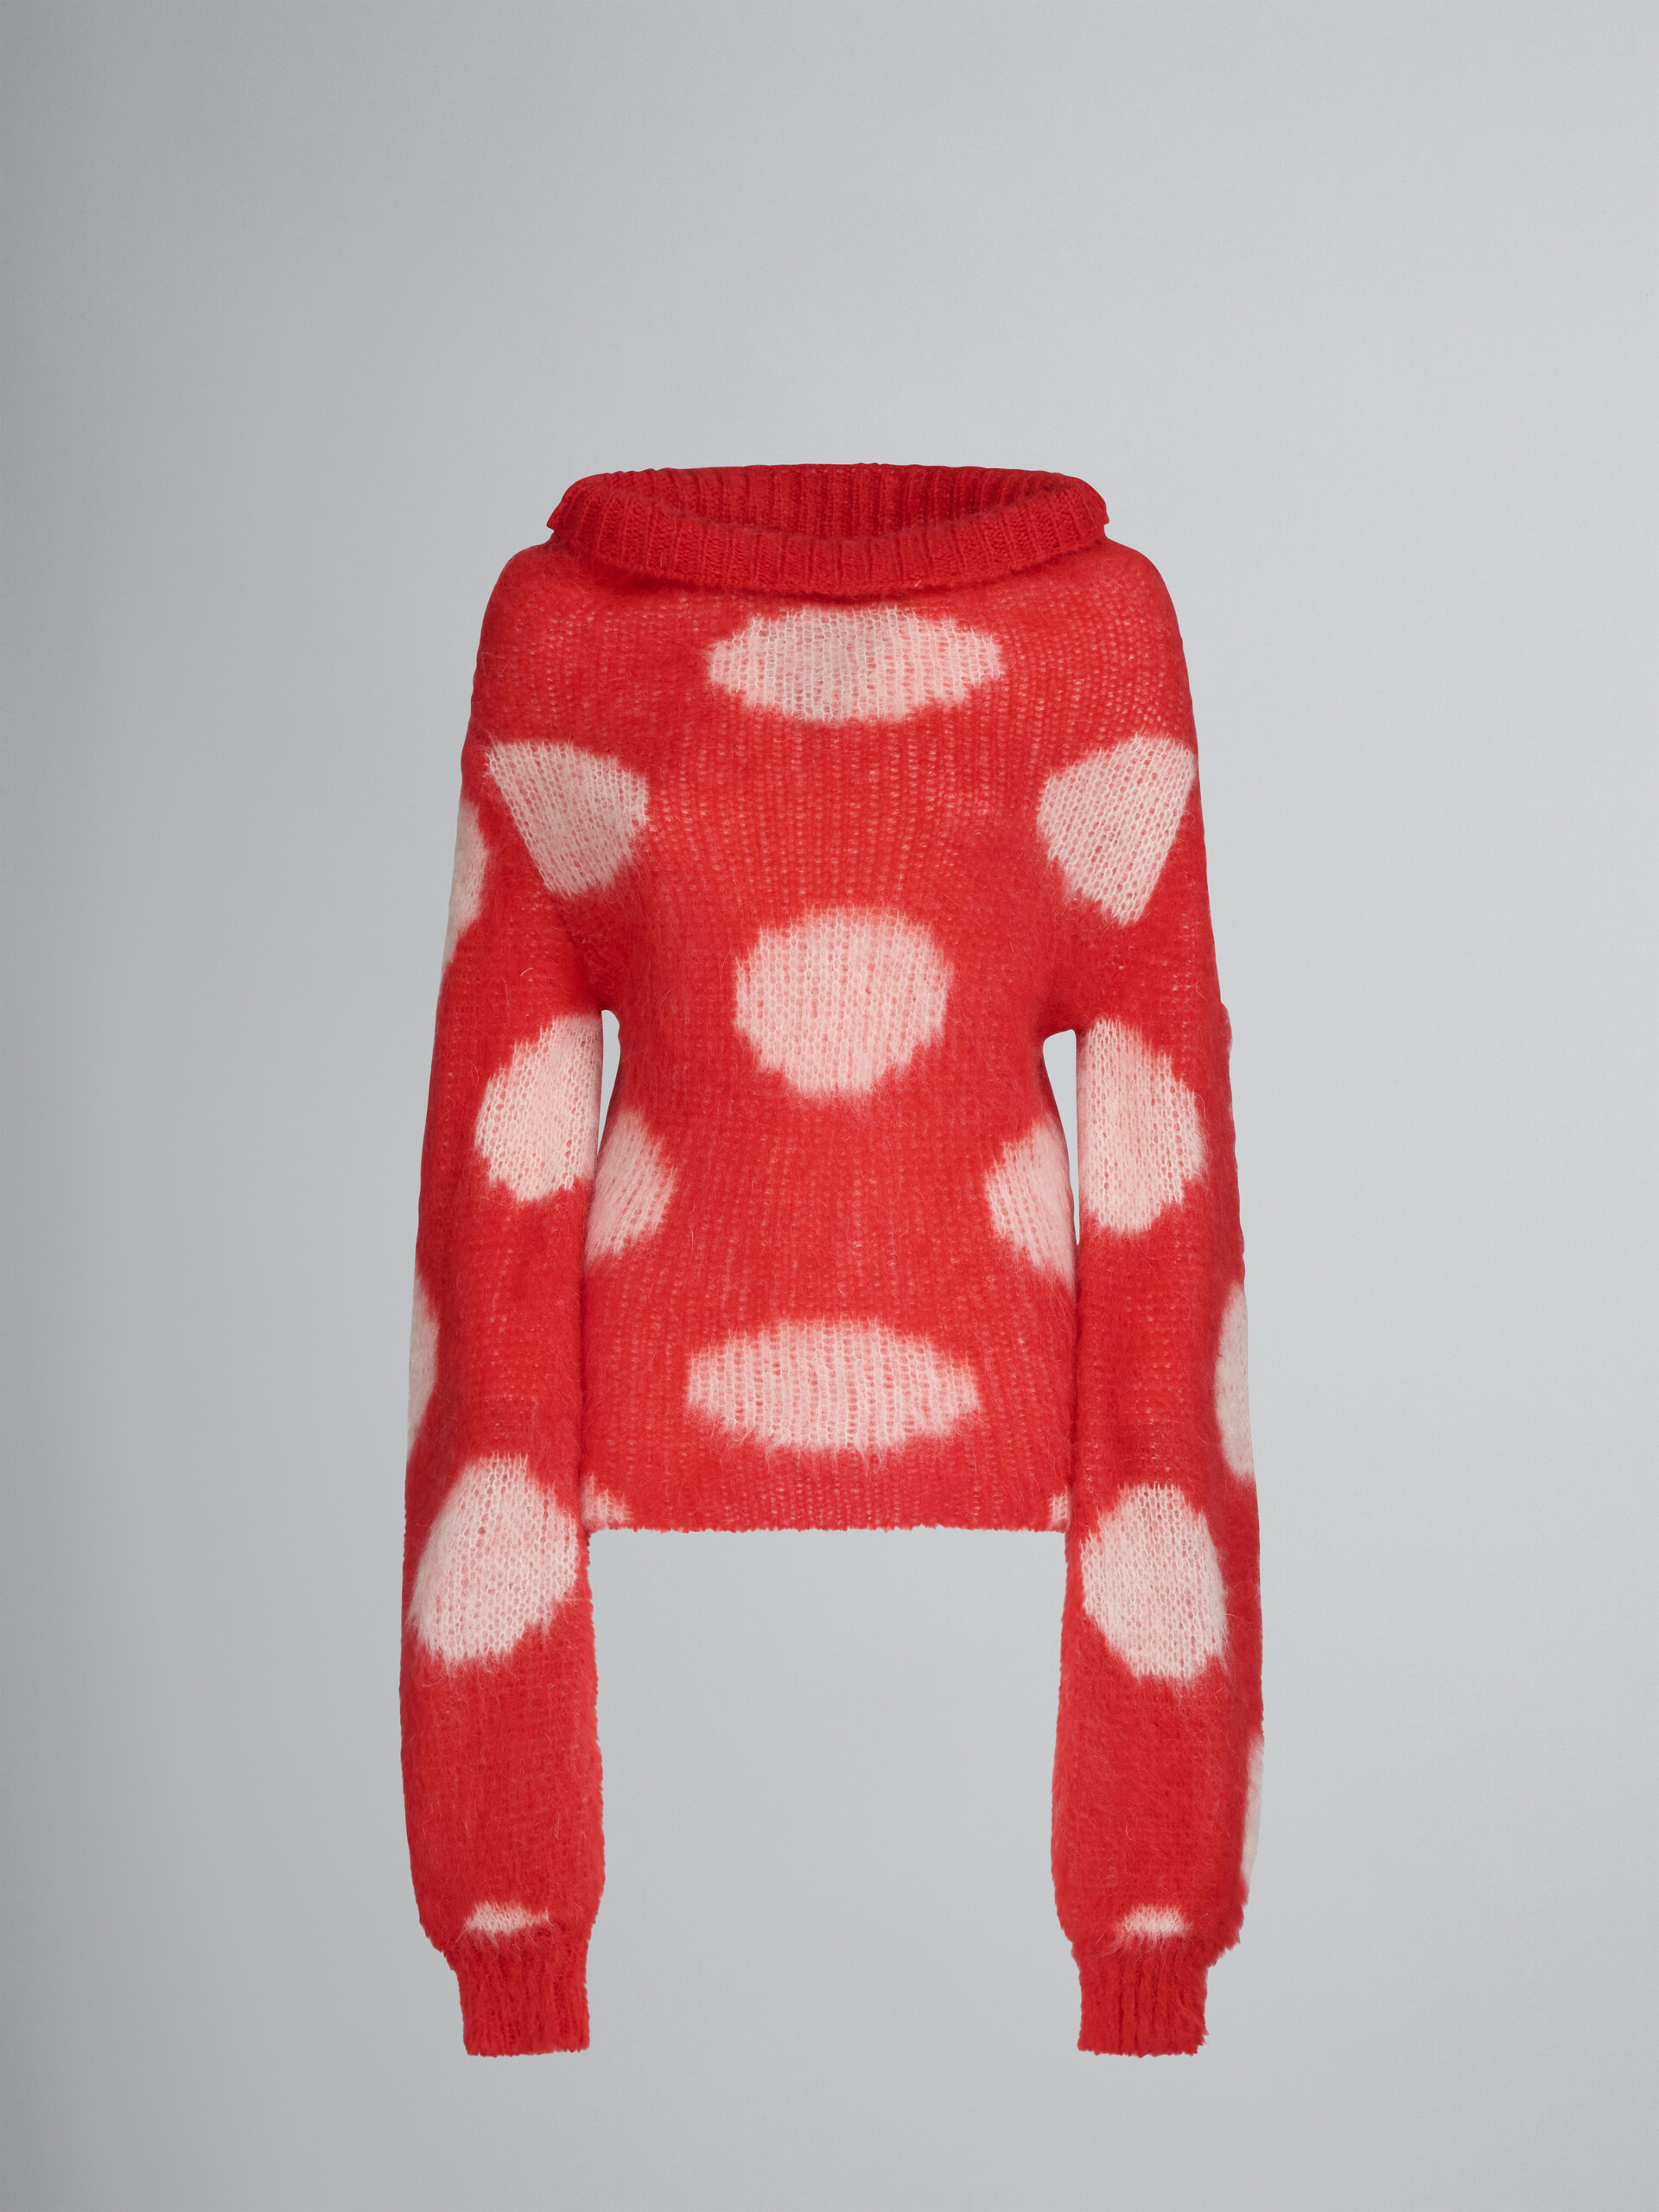 Red mohair boat-neck jumper with polka dots - Pullovers - Image 1